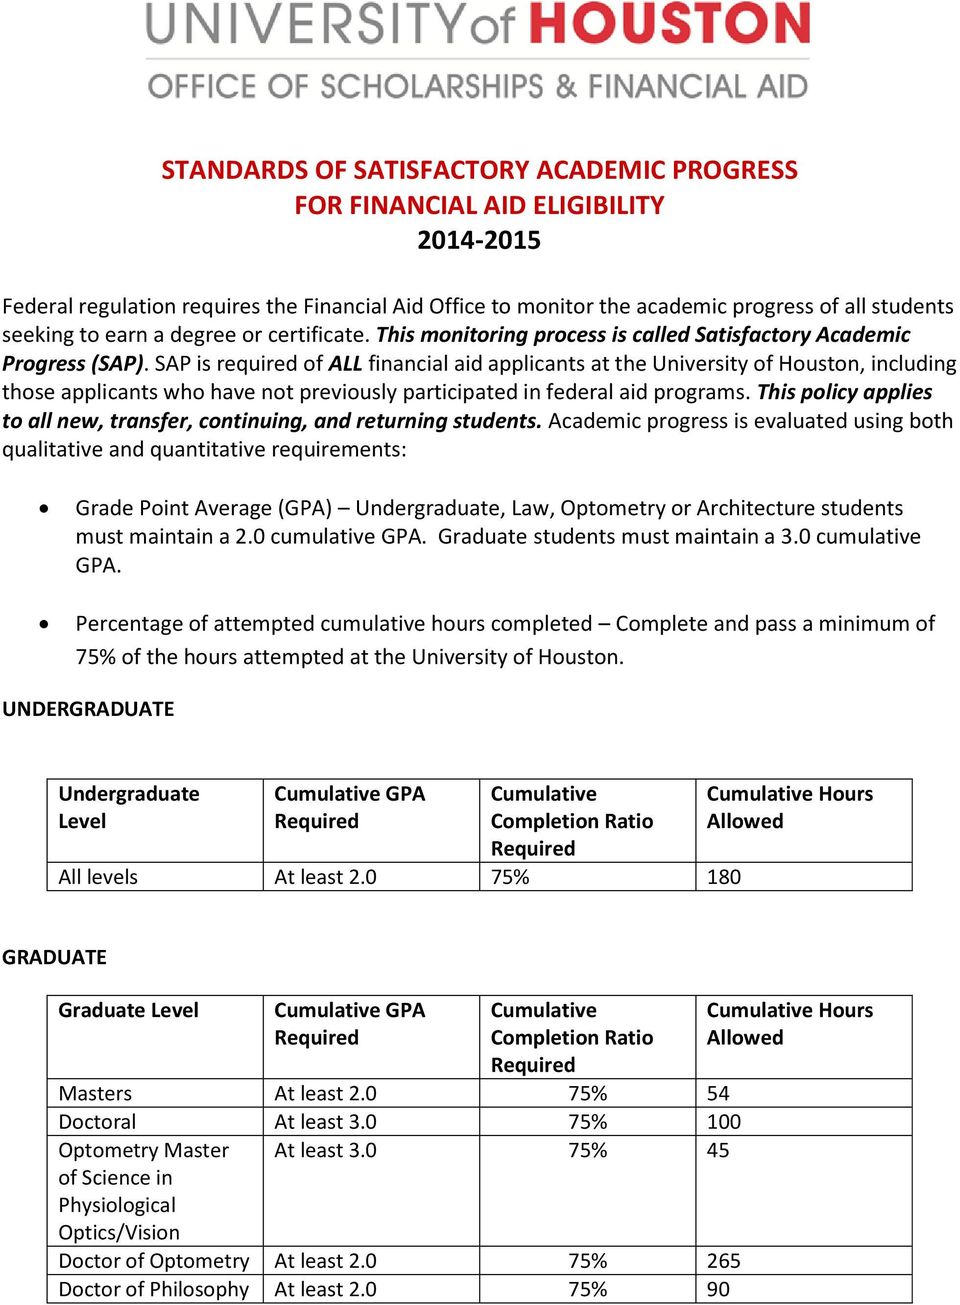 SAP is required of ALL financial aid applicants at the University of Houston, including those applicants who have not previously participated in federal aid programs.